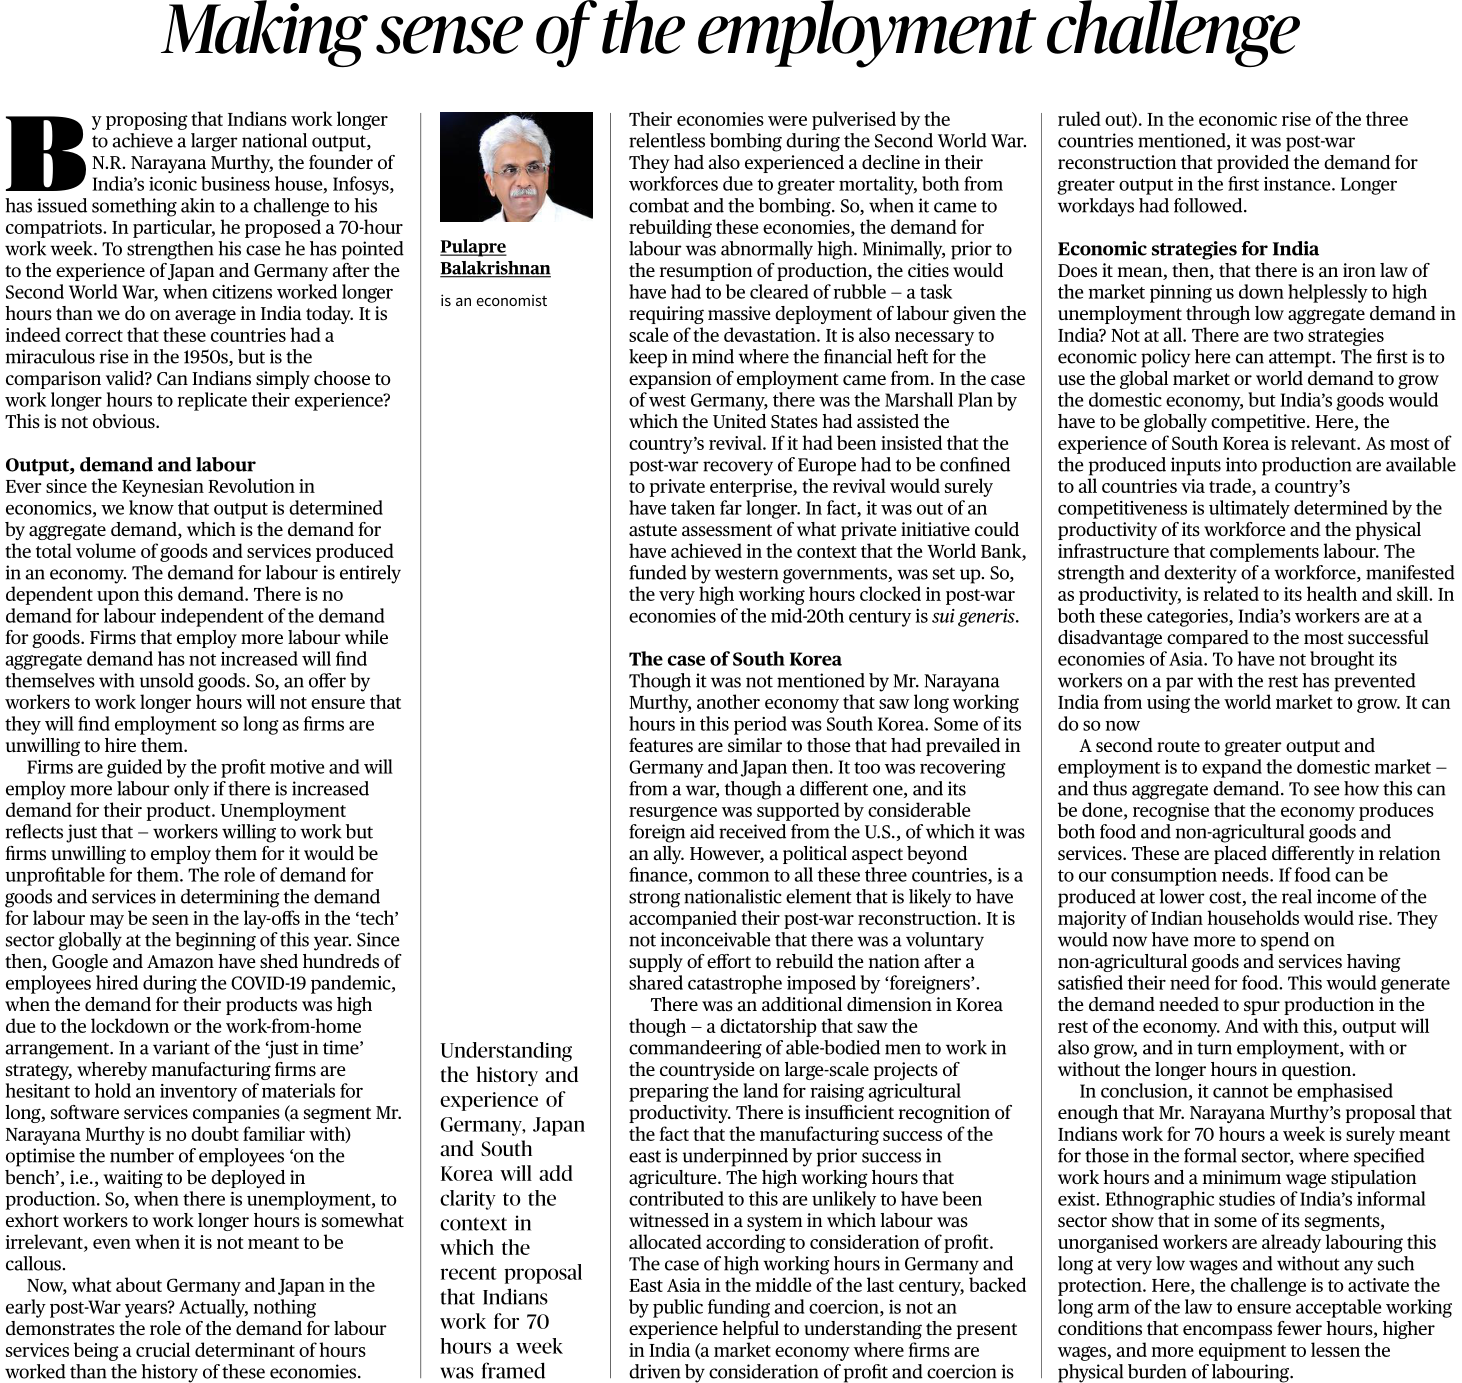 Making sense of the employment challenge - Page No.6 , GS 3